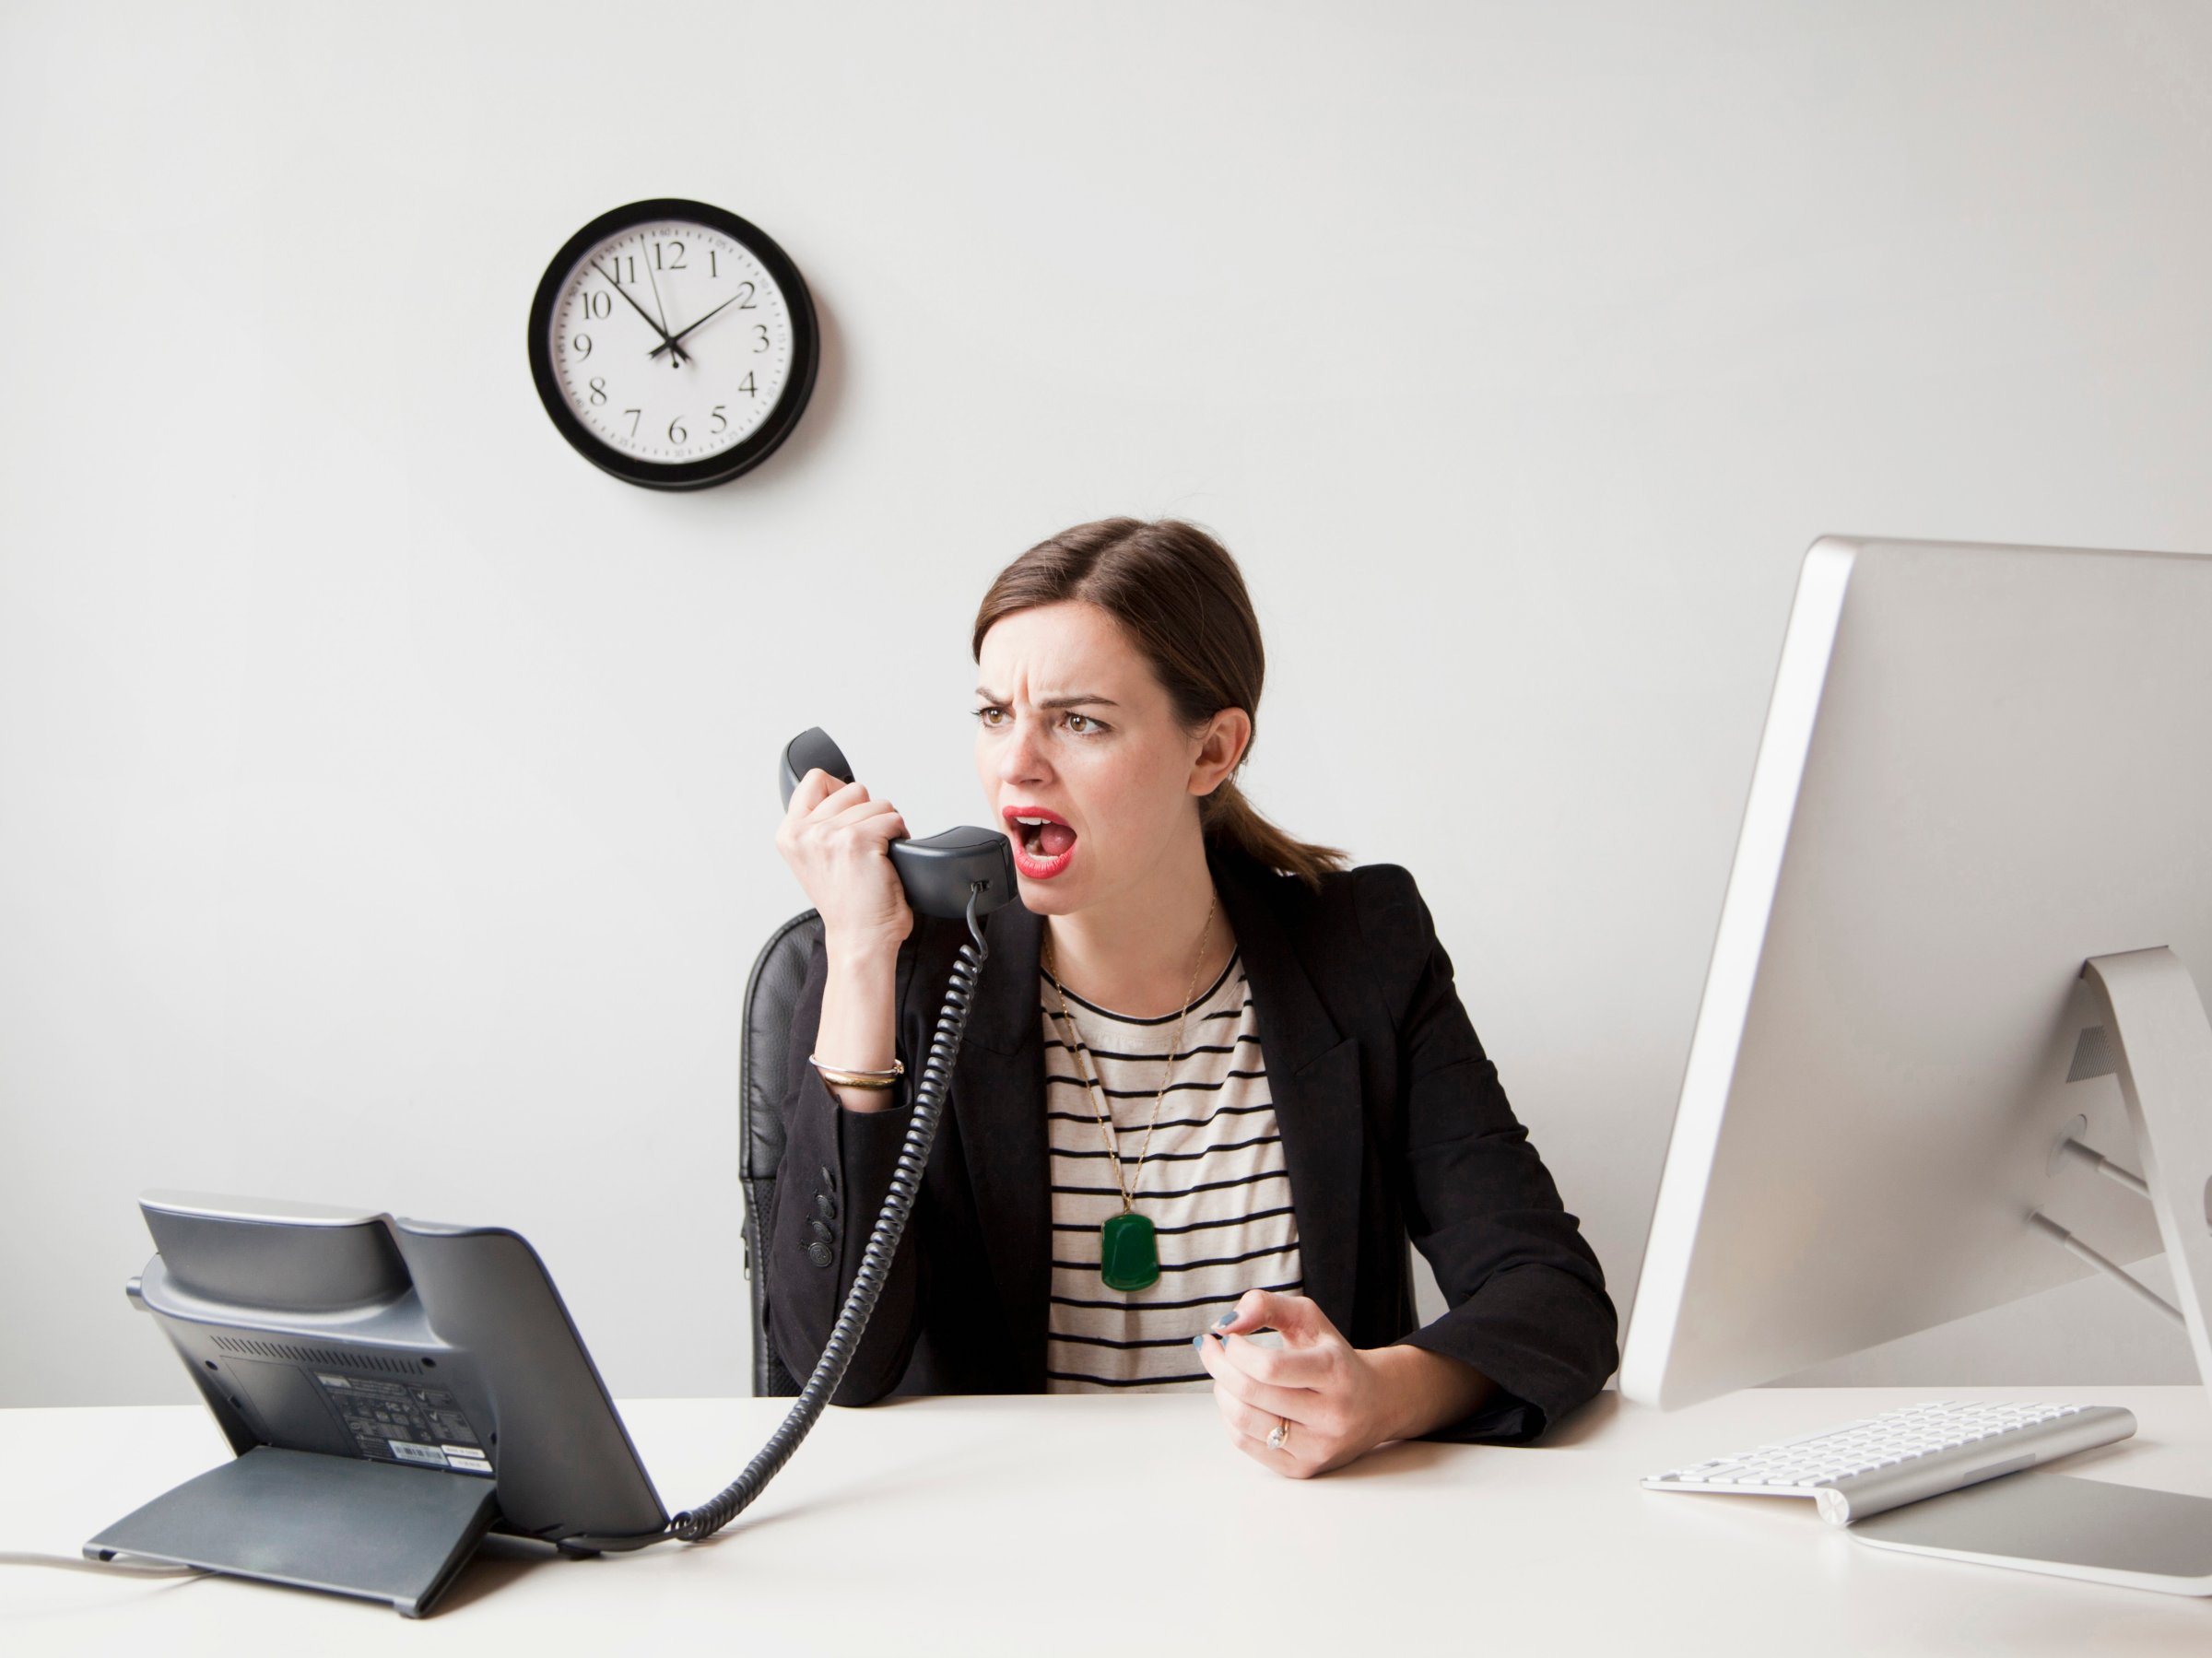 Studio shot of young woman working in office yelling into phone